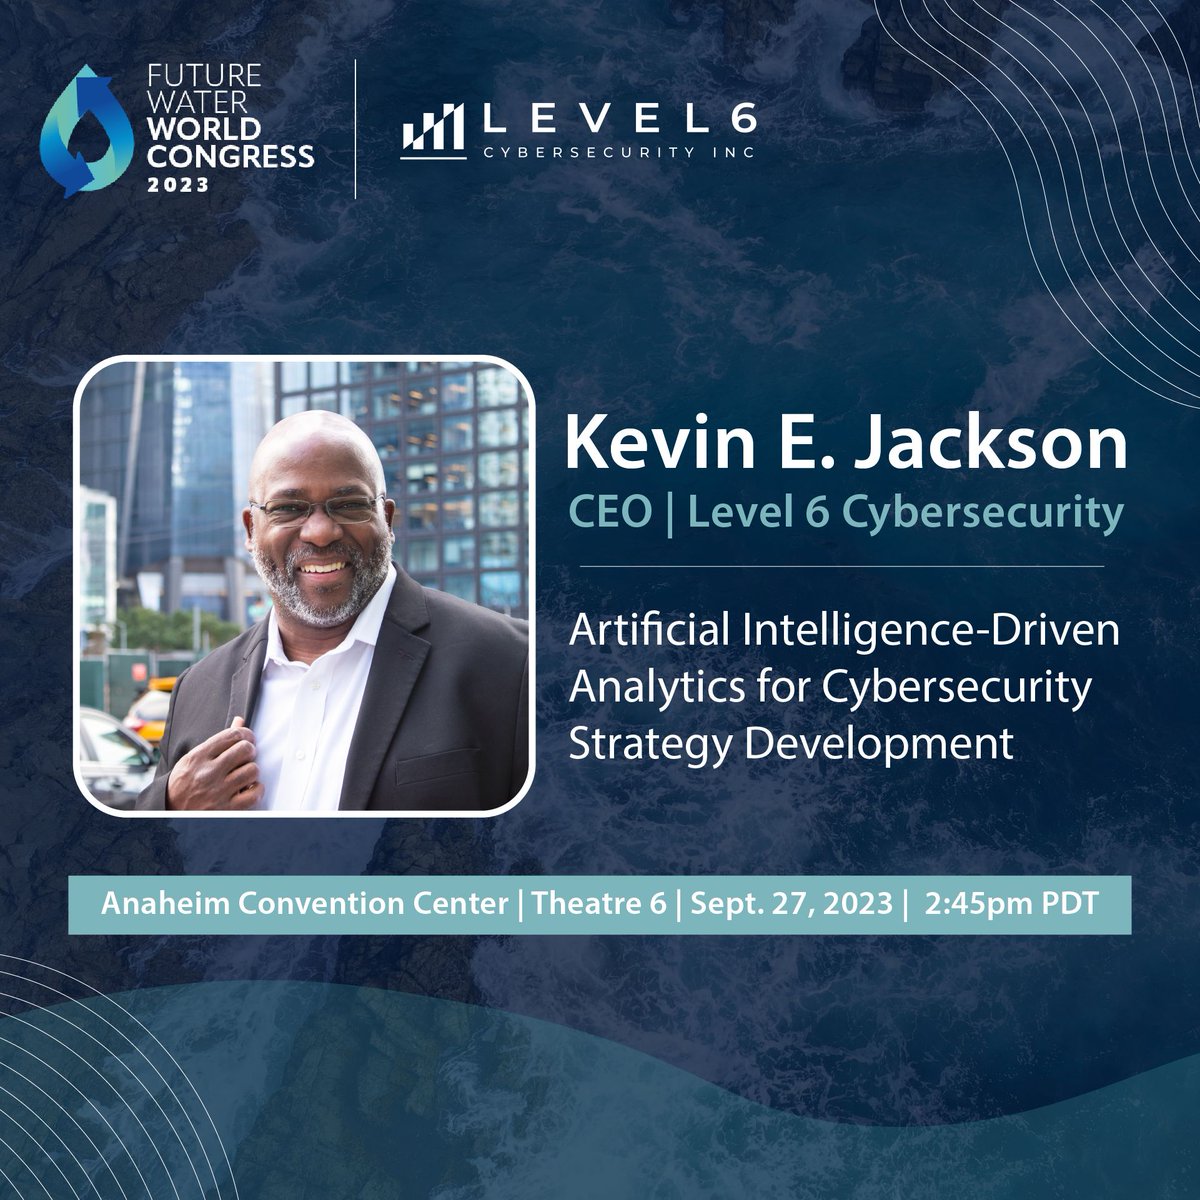 Don't miss L6 CEO Kevin E. Jackson speaking today at Future Water World Congress 2023! 

Catch his presentation on 'Artificial  Intelligence-Driven Analytics for Cybersecurity Strategy Development' in Theatre 6 at 2:45pm PDT. #FWWC